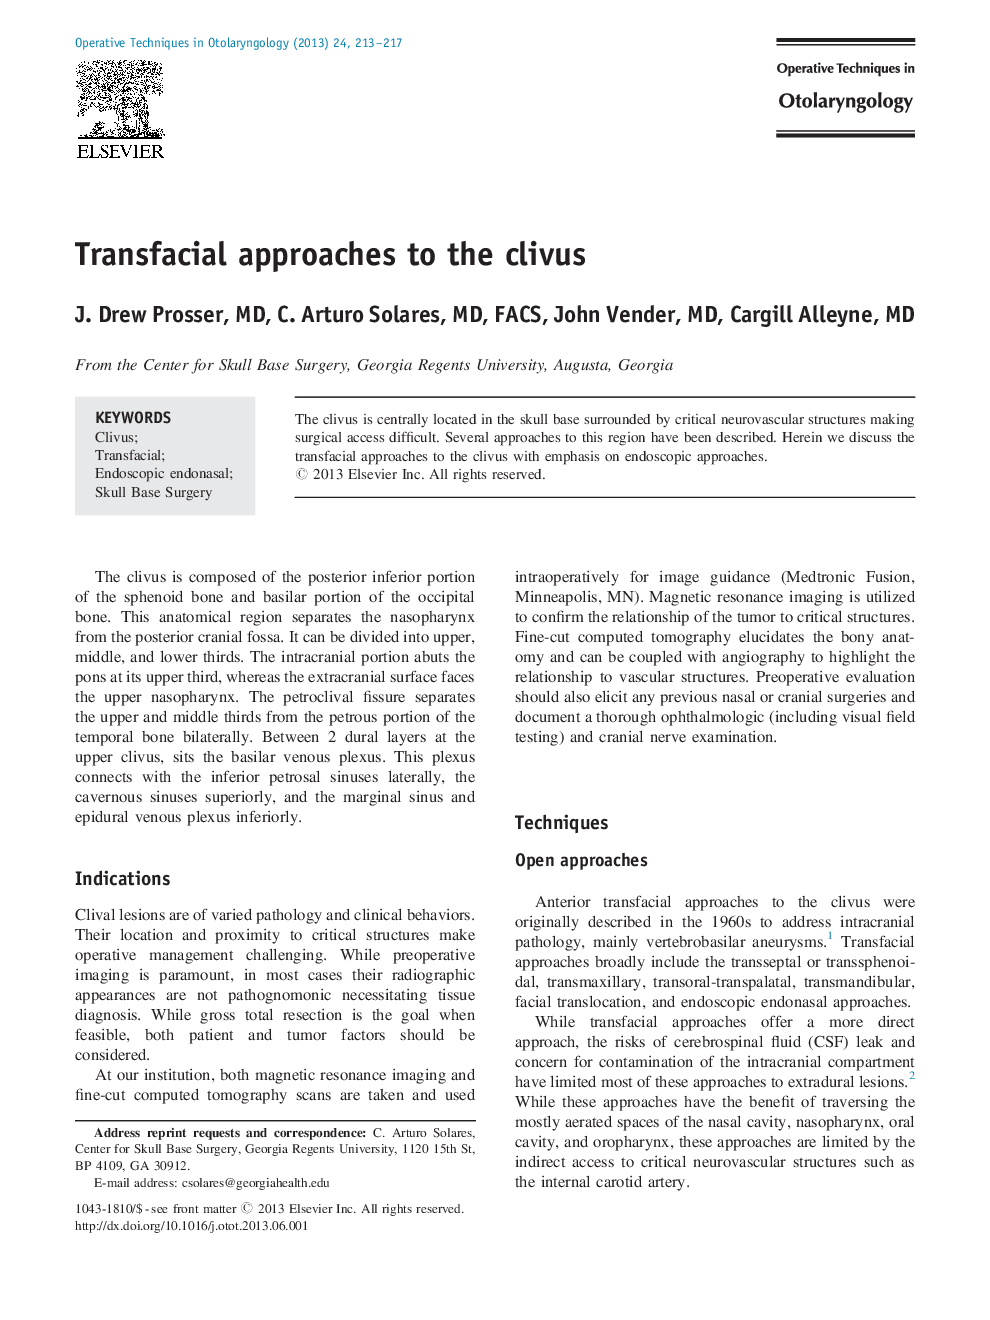 Transfacial approaches to the clivus